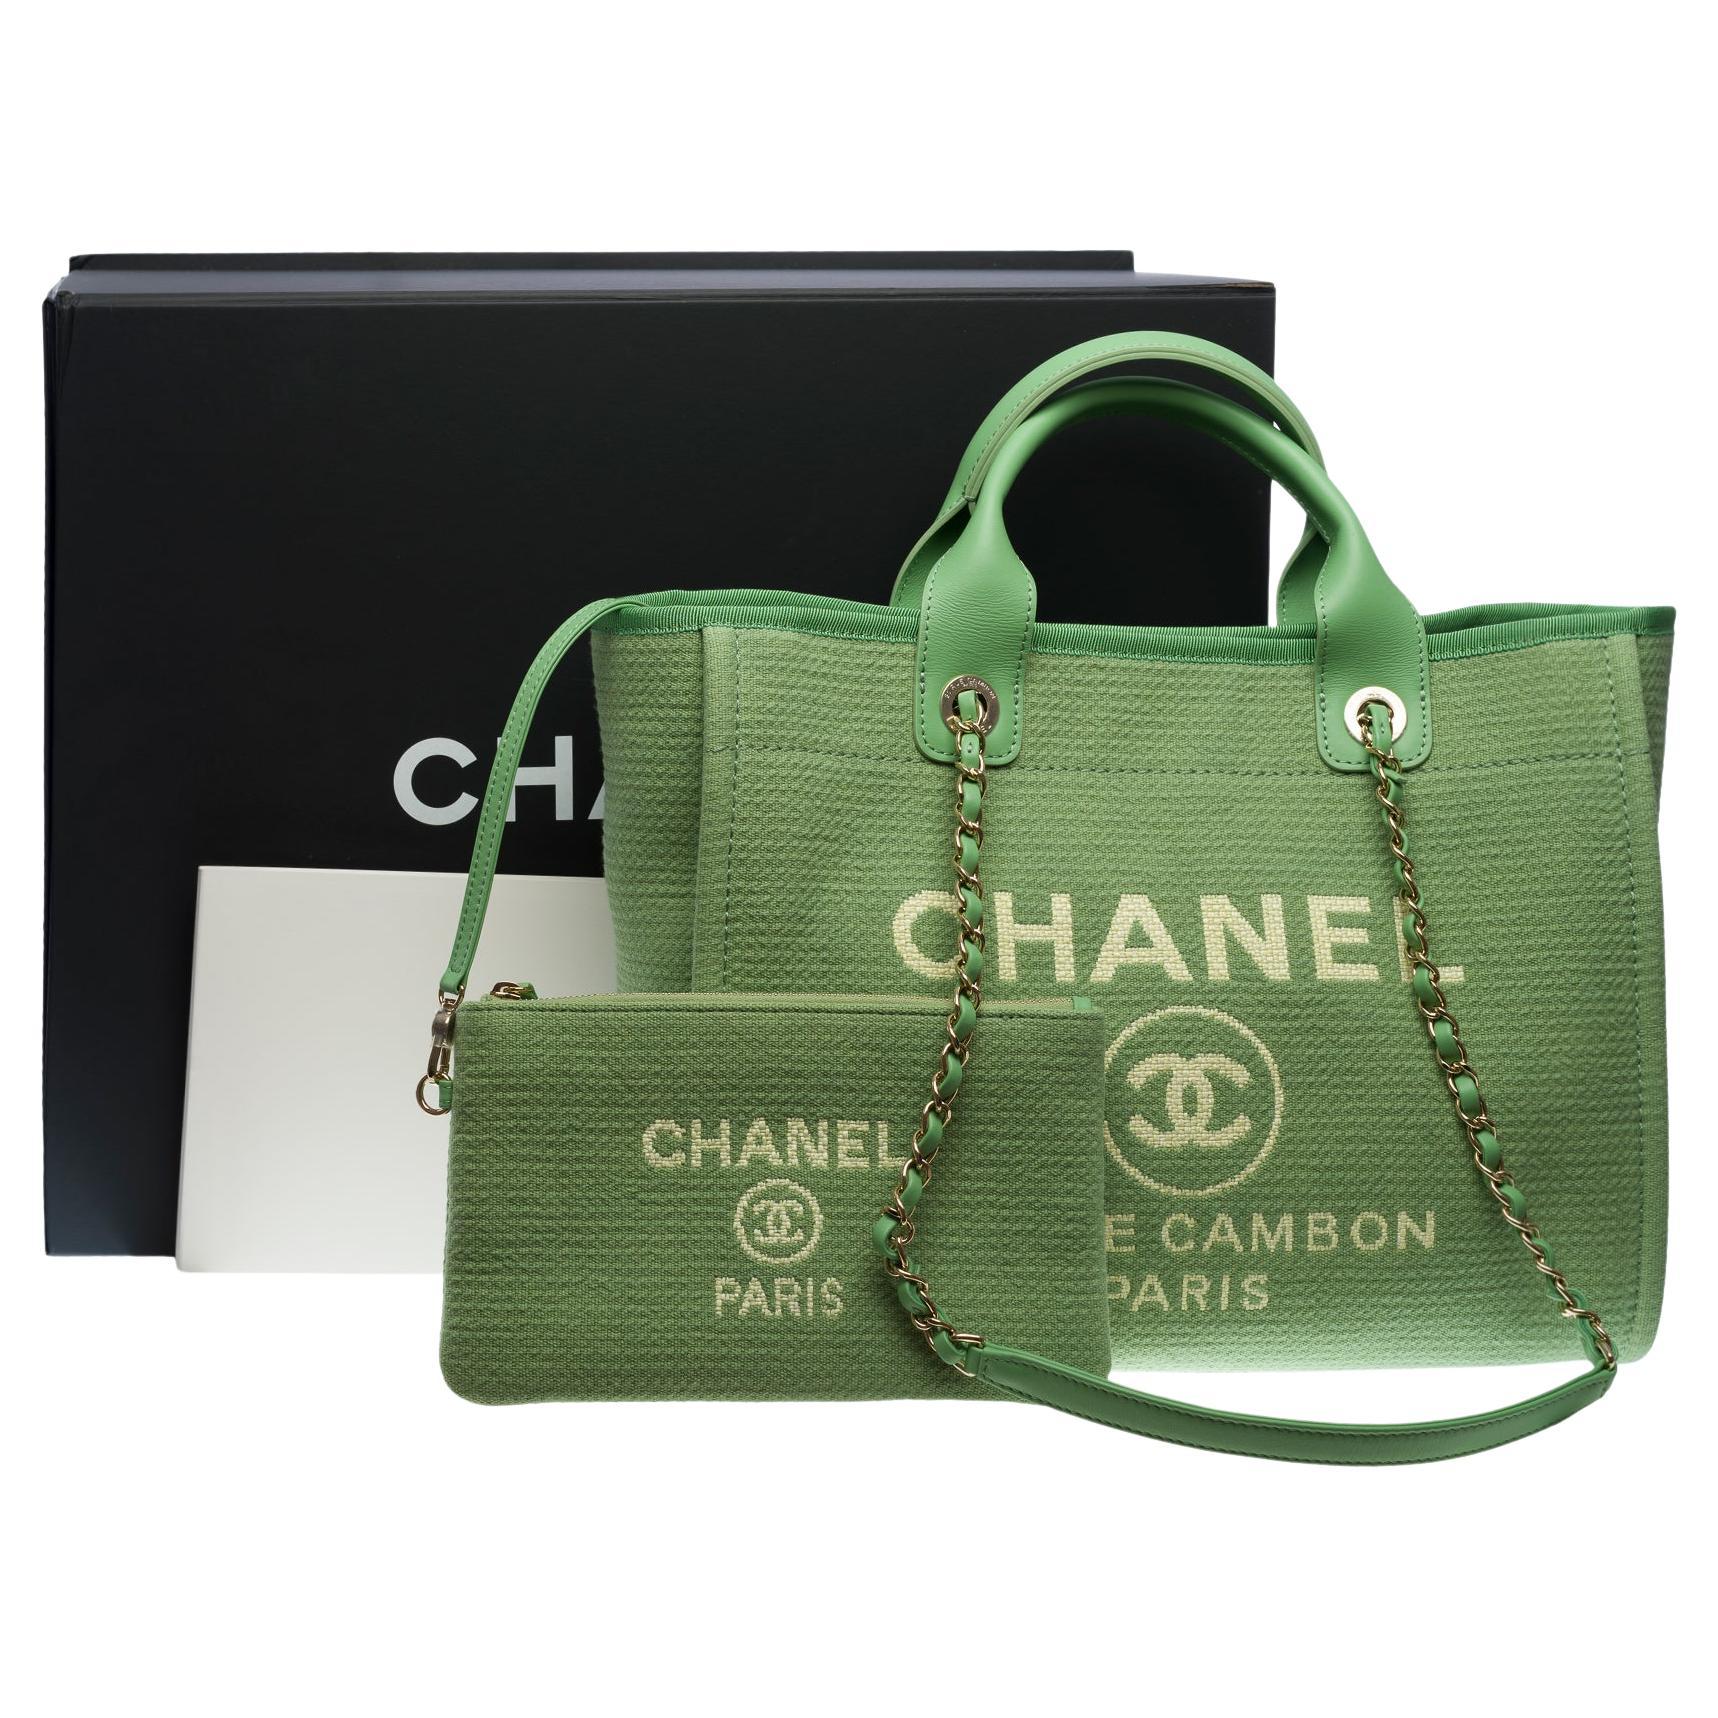 New Amazing limited edition Chanel Deauville Tote bag in Green canvas, SHW For Sale